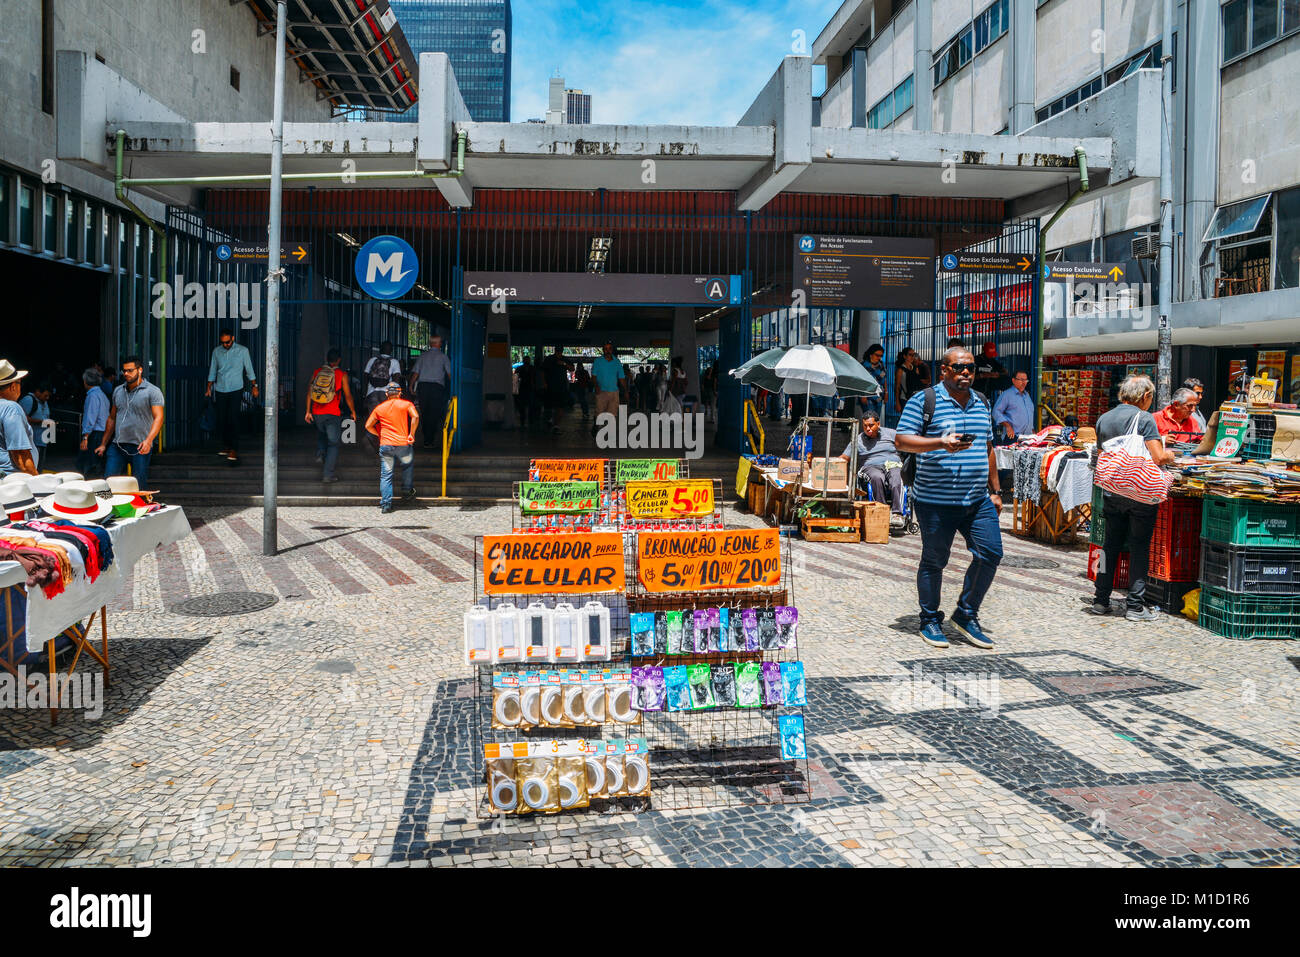 Street sellers in downtown Rio de Janeiro selling items such as electronics, books, food and clothes Stock Photo